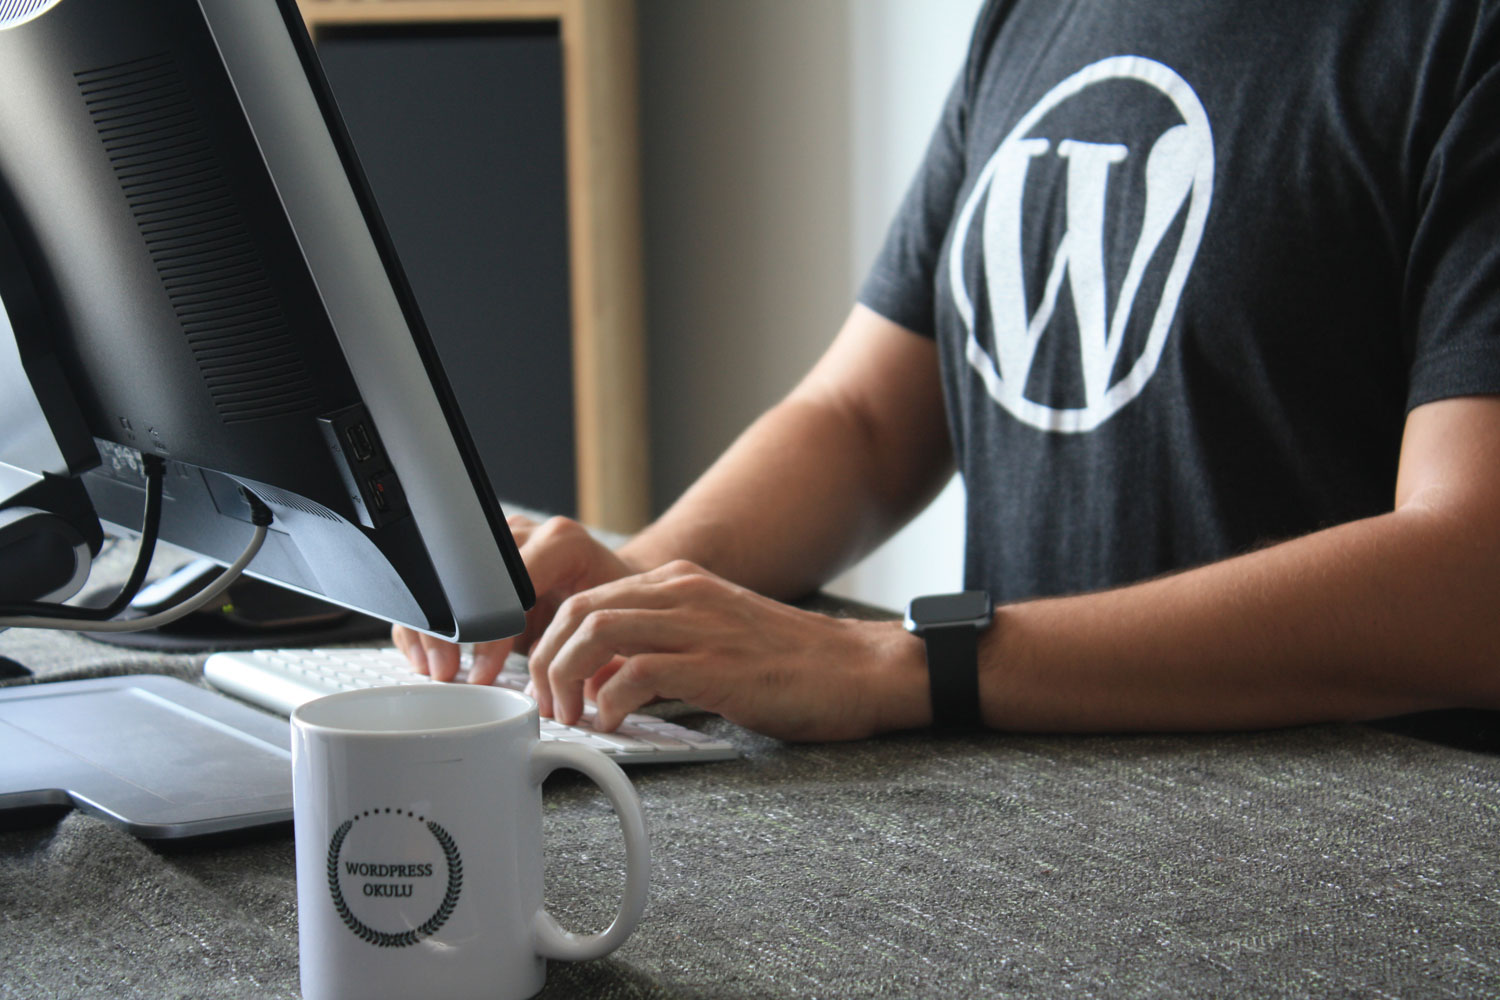 The impact of the latest WordPress update on your website